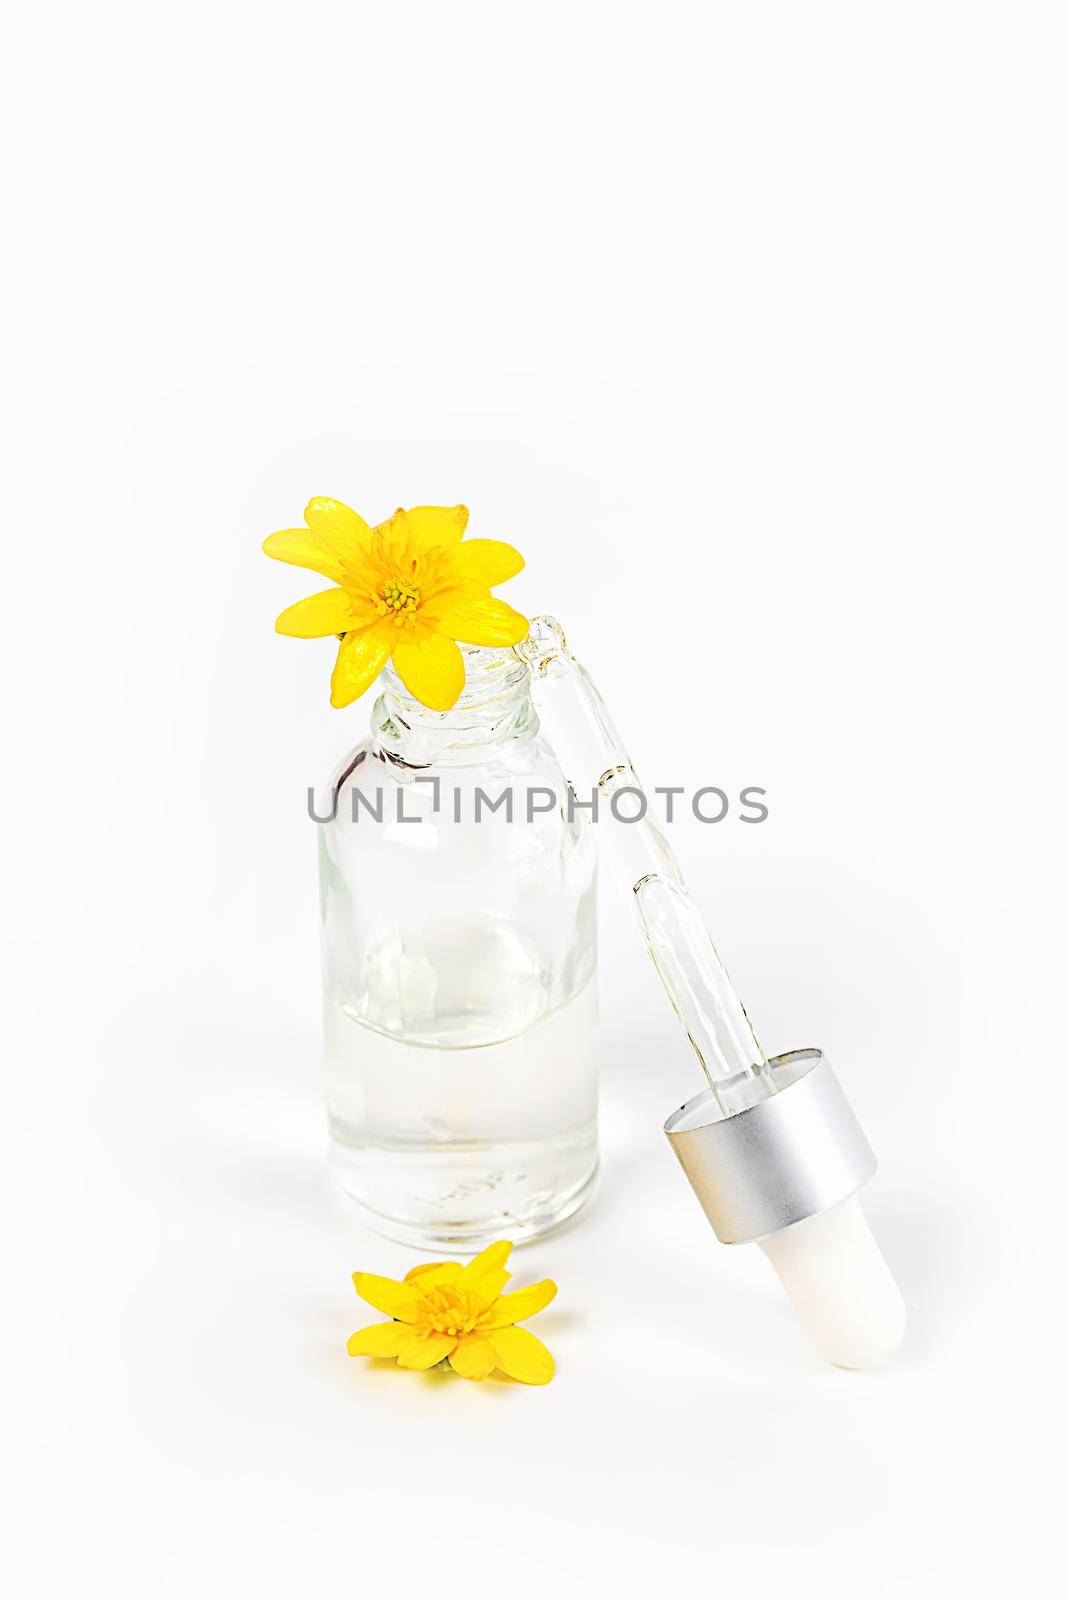 A bottle with a pipette serum on a white background among yellow spring flowers by galinasharapova